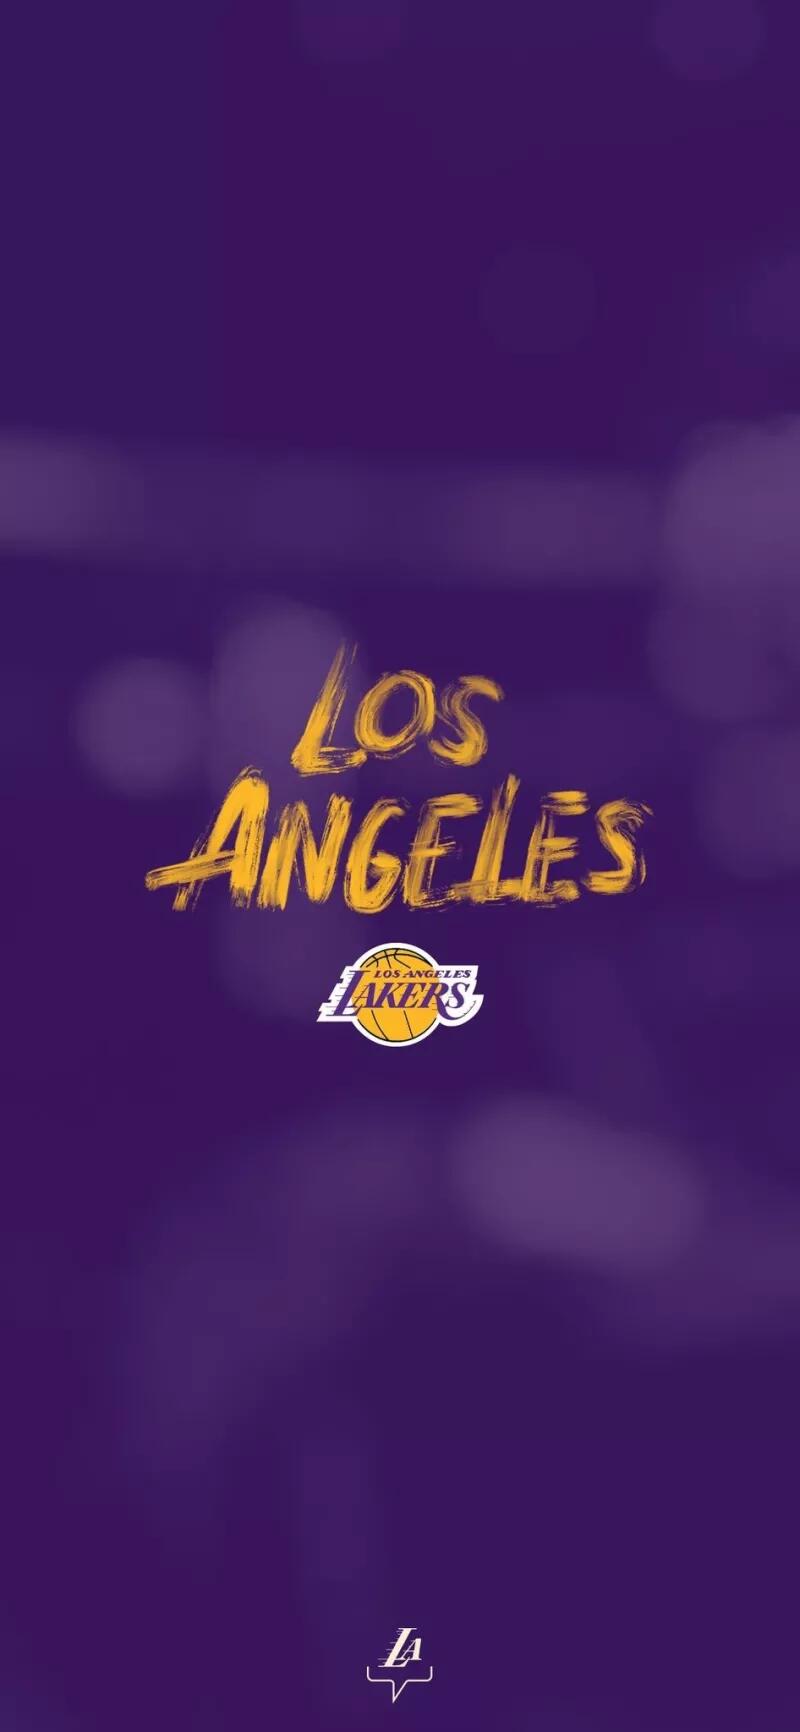 lalakers